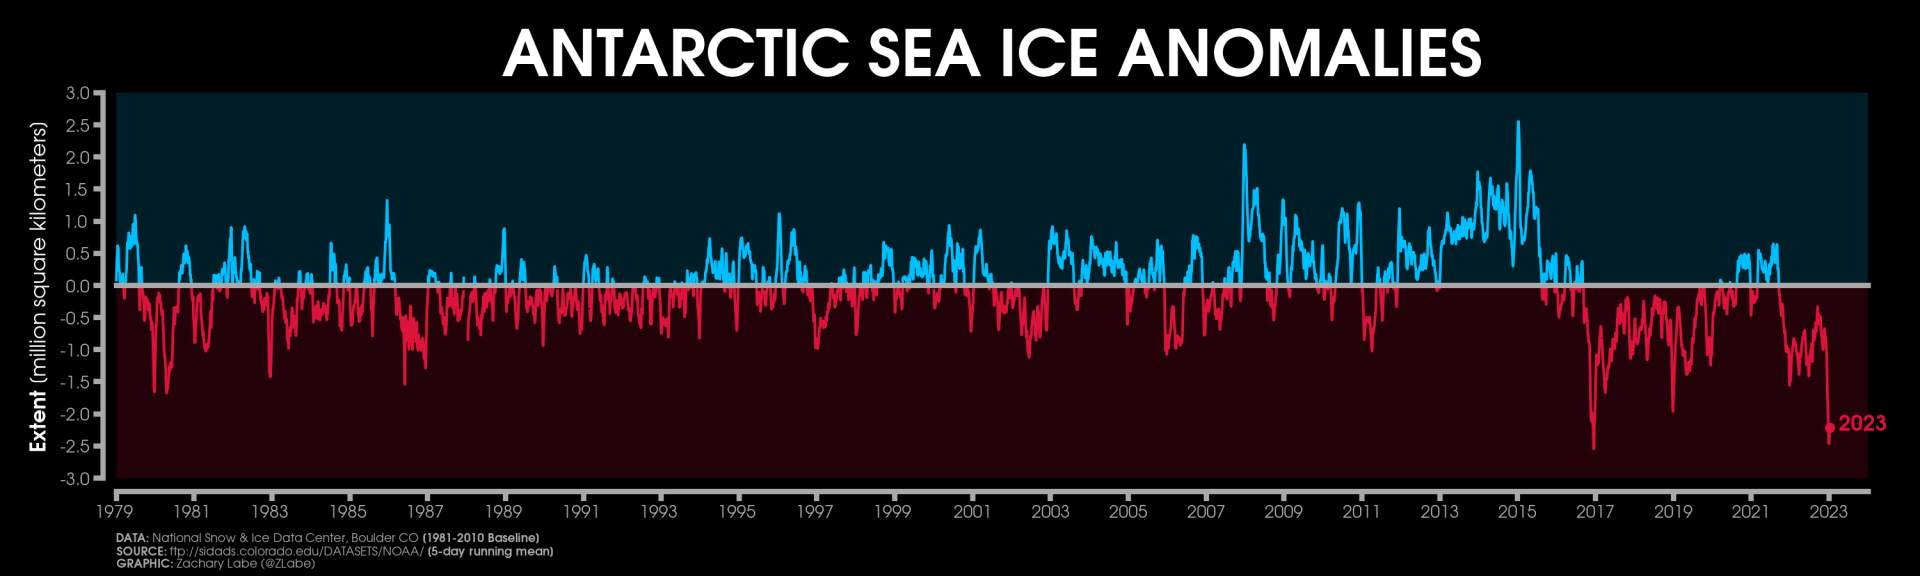 Fig. 1: Anomaly of Antarctic sea ice extent since 1979, (image source: zacklabe.com).; Source: zacklabe.com